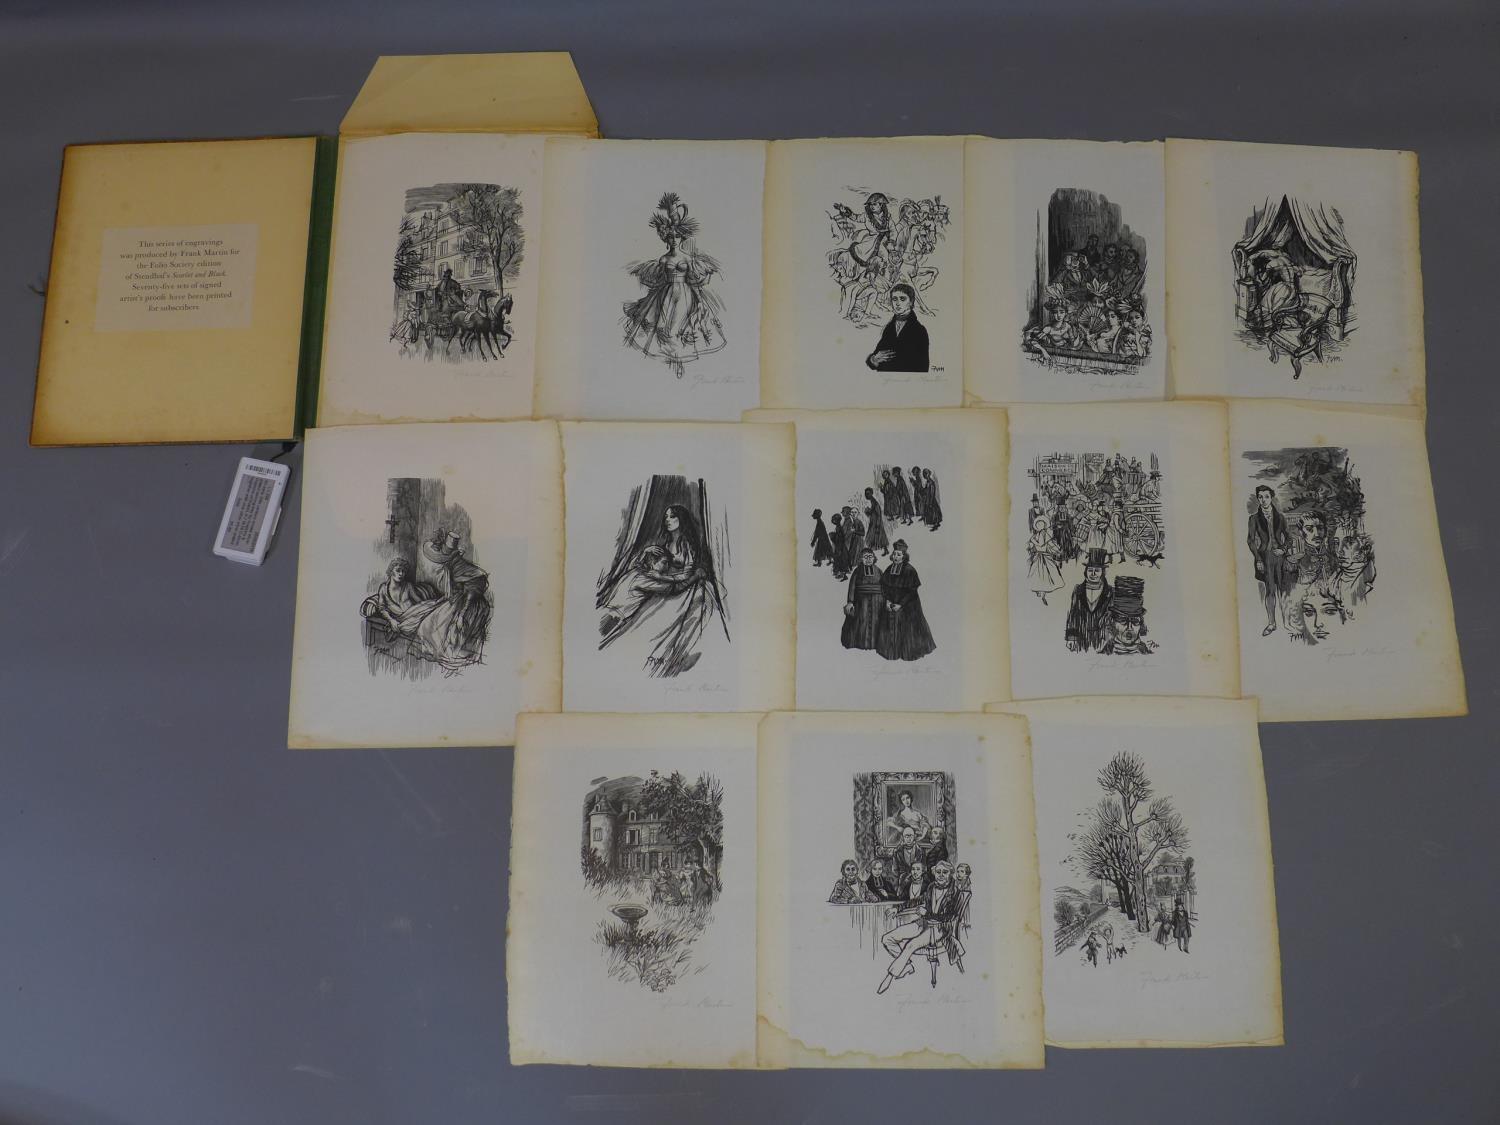 Wood Engravings by Frank Martin for Stendhal's 'Scarlet and Black', a series of 13 engravings